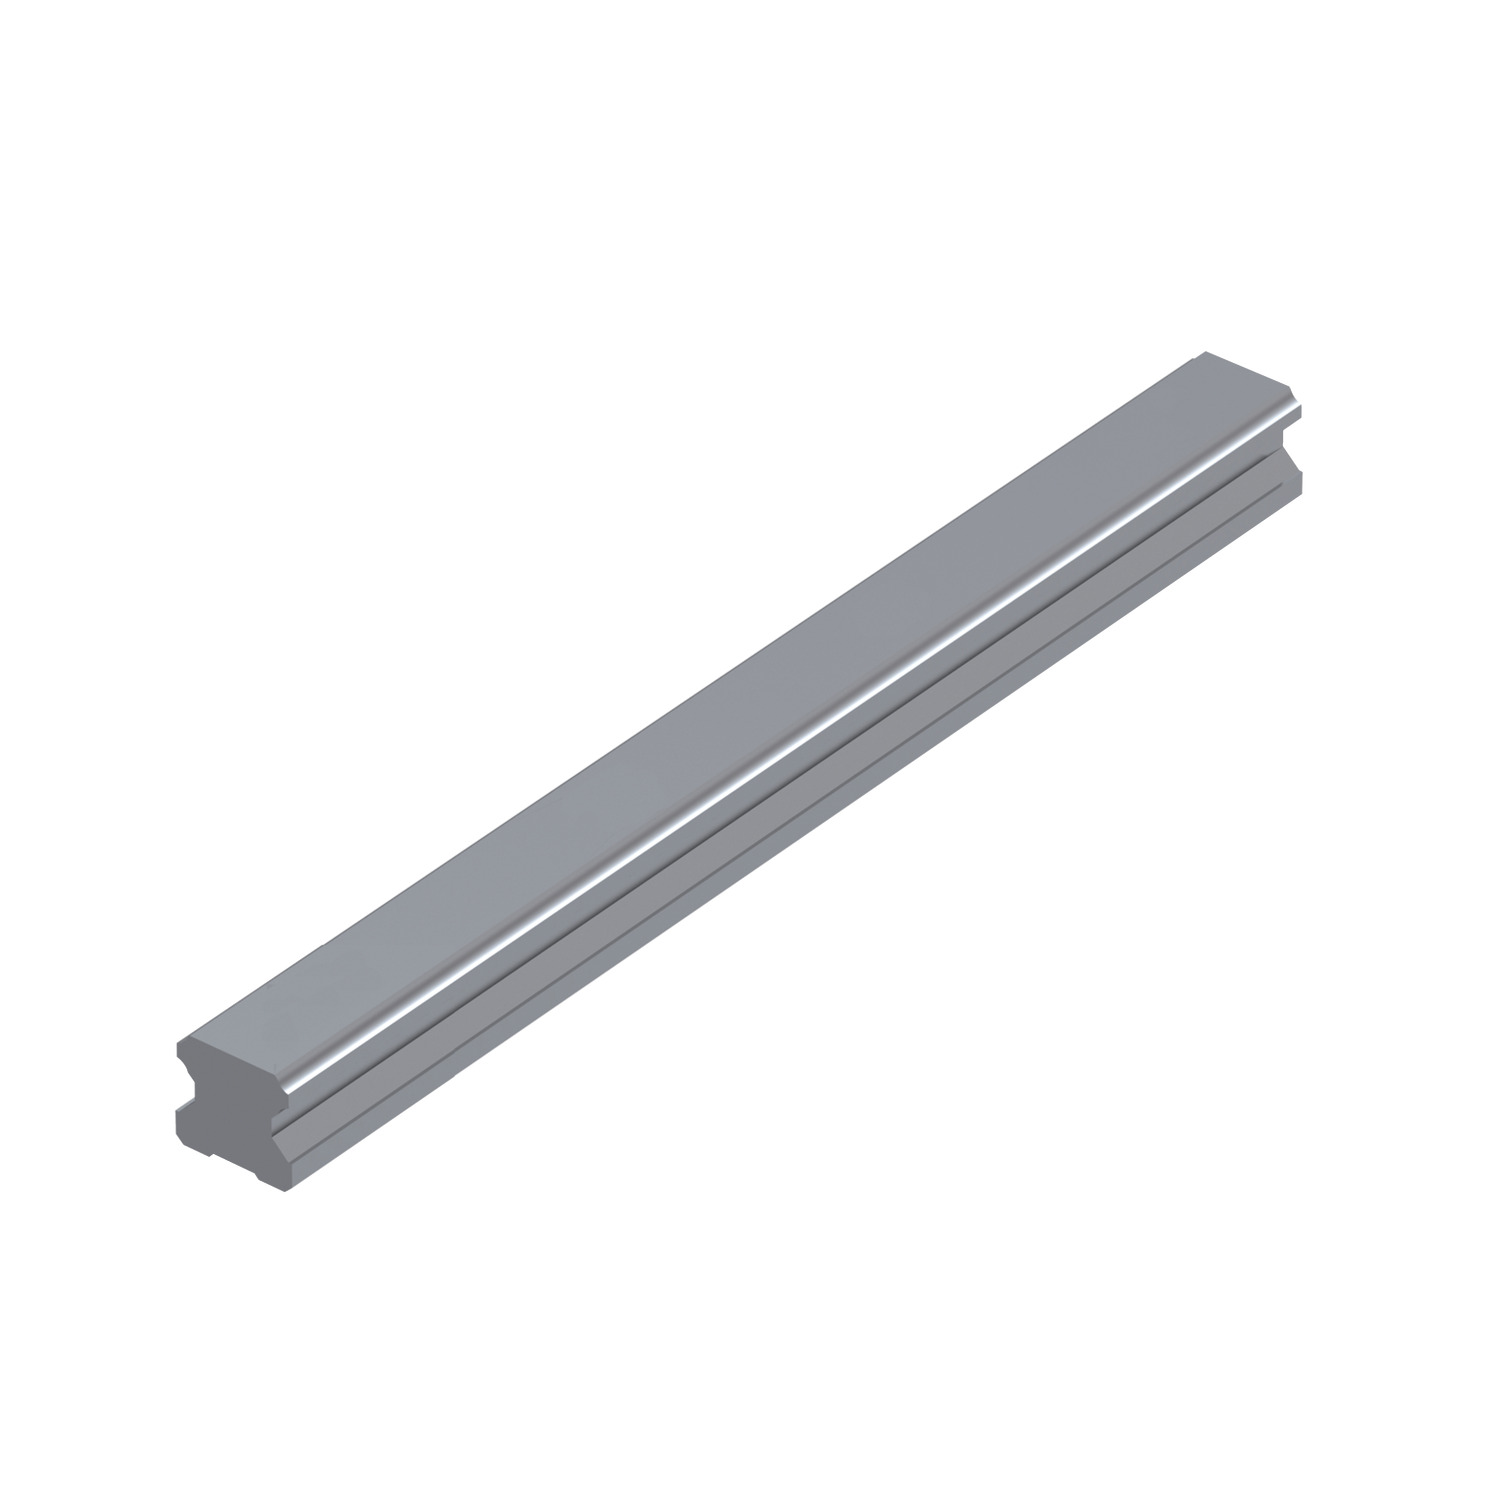 L1016.RF15-0160 Linear guide rail rear fixing 15mm 0160 Hardened and ground steel. EC:20166021 WG:05063055294676